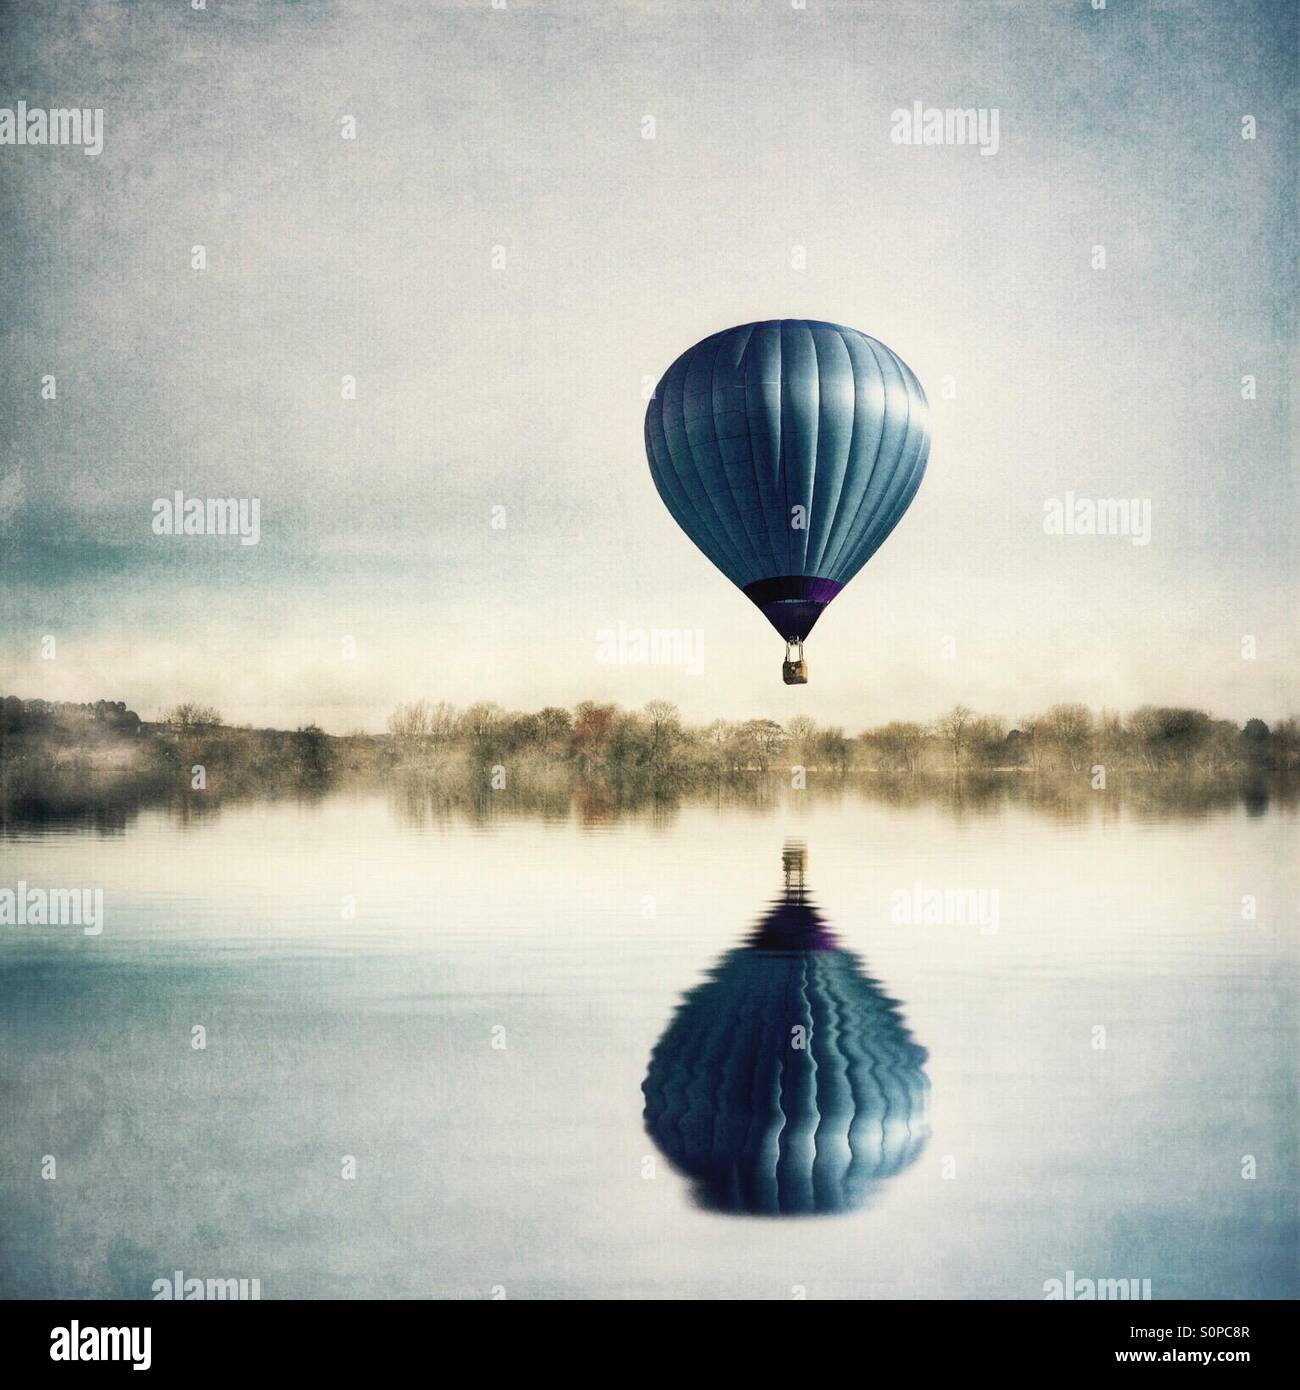 Reflection of hot air balloon in lake Stock Photo